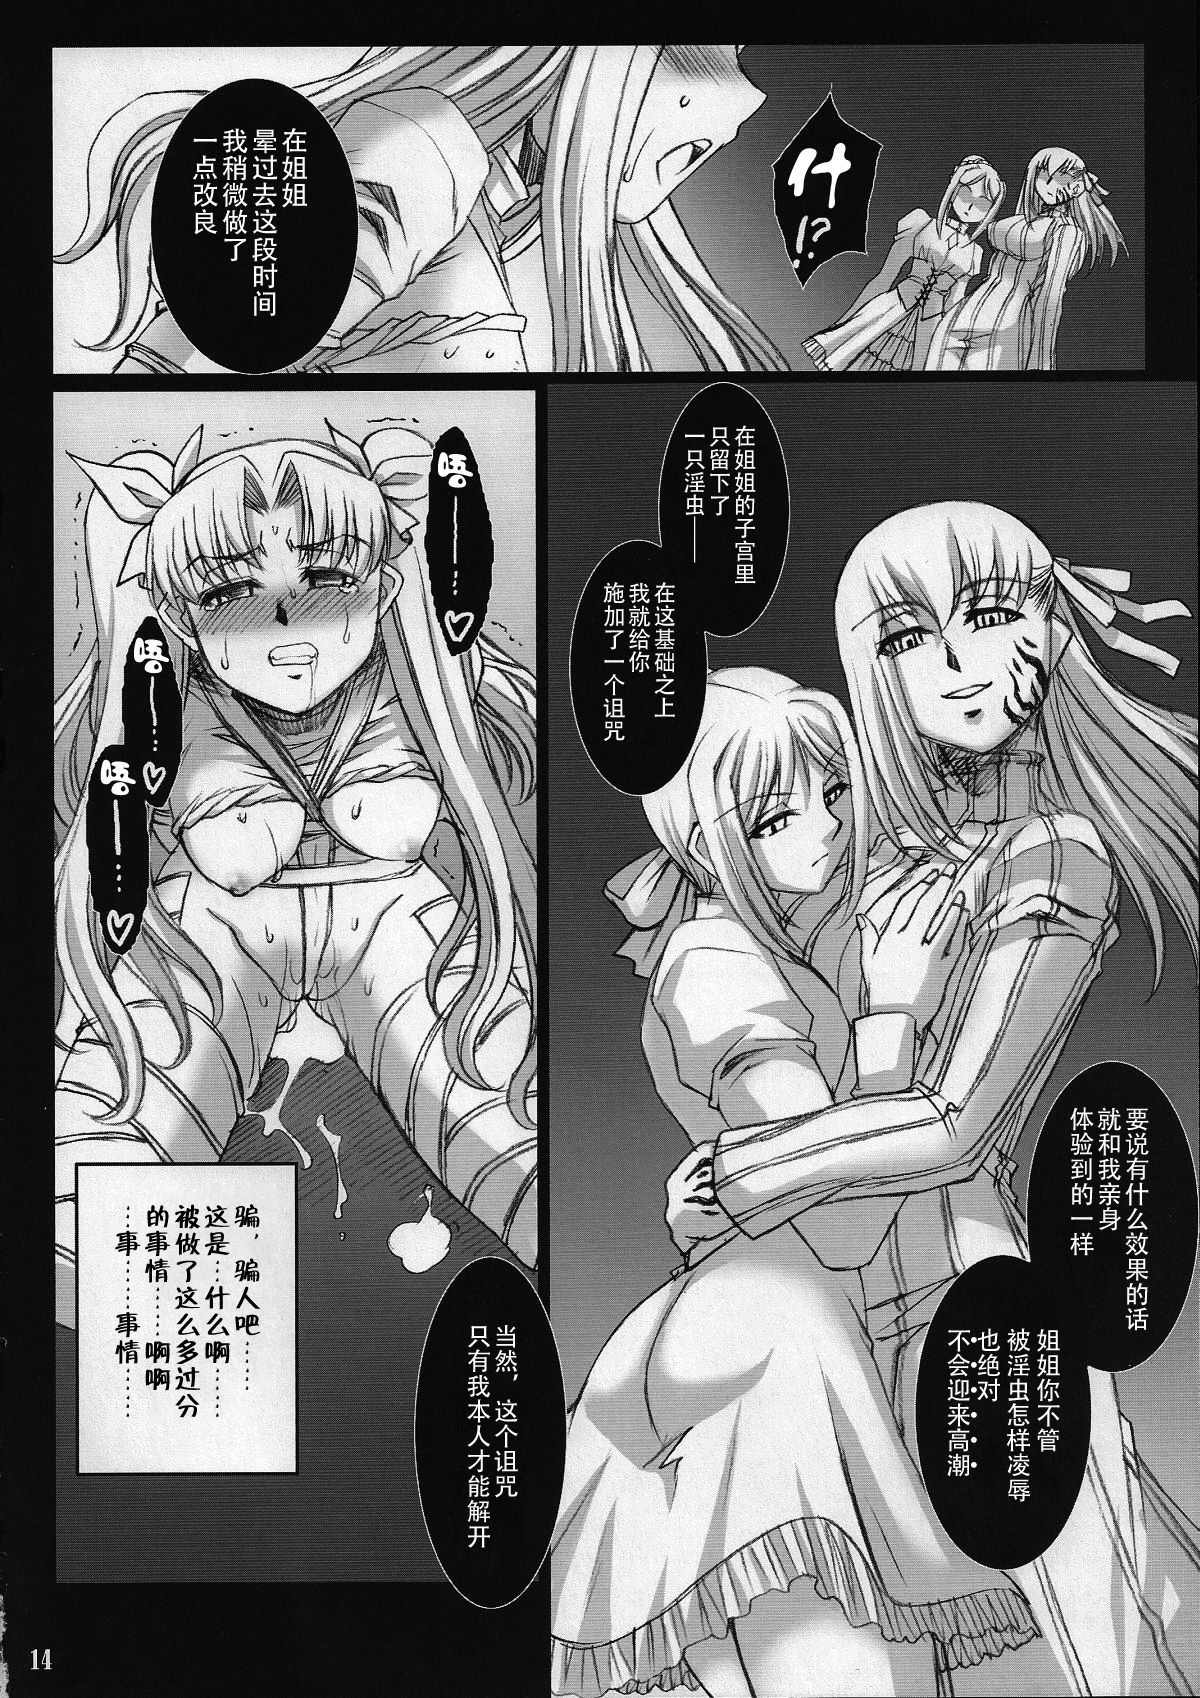 (COMIC1☆2) [H.B (B-RIVER)] Red Degeneration -DAY/3- (Fate/stay night) [Chinese] [不咕鸟汉化组] page 13 full